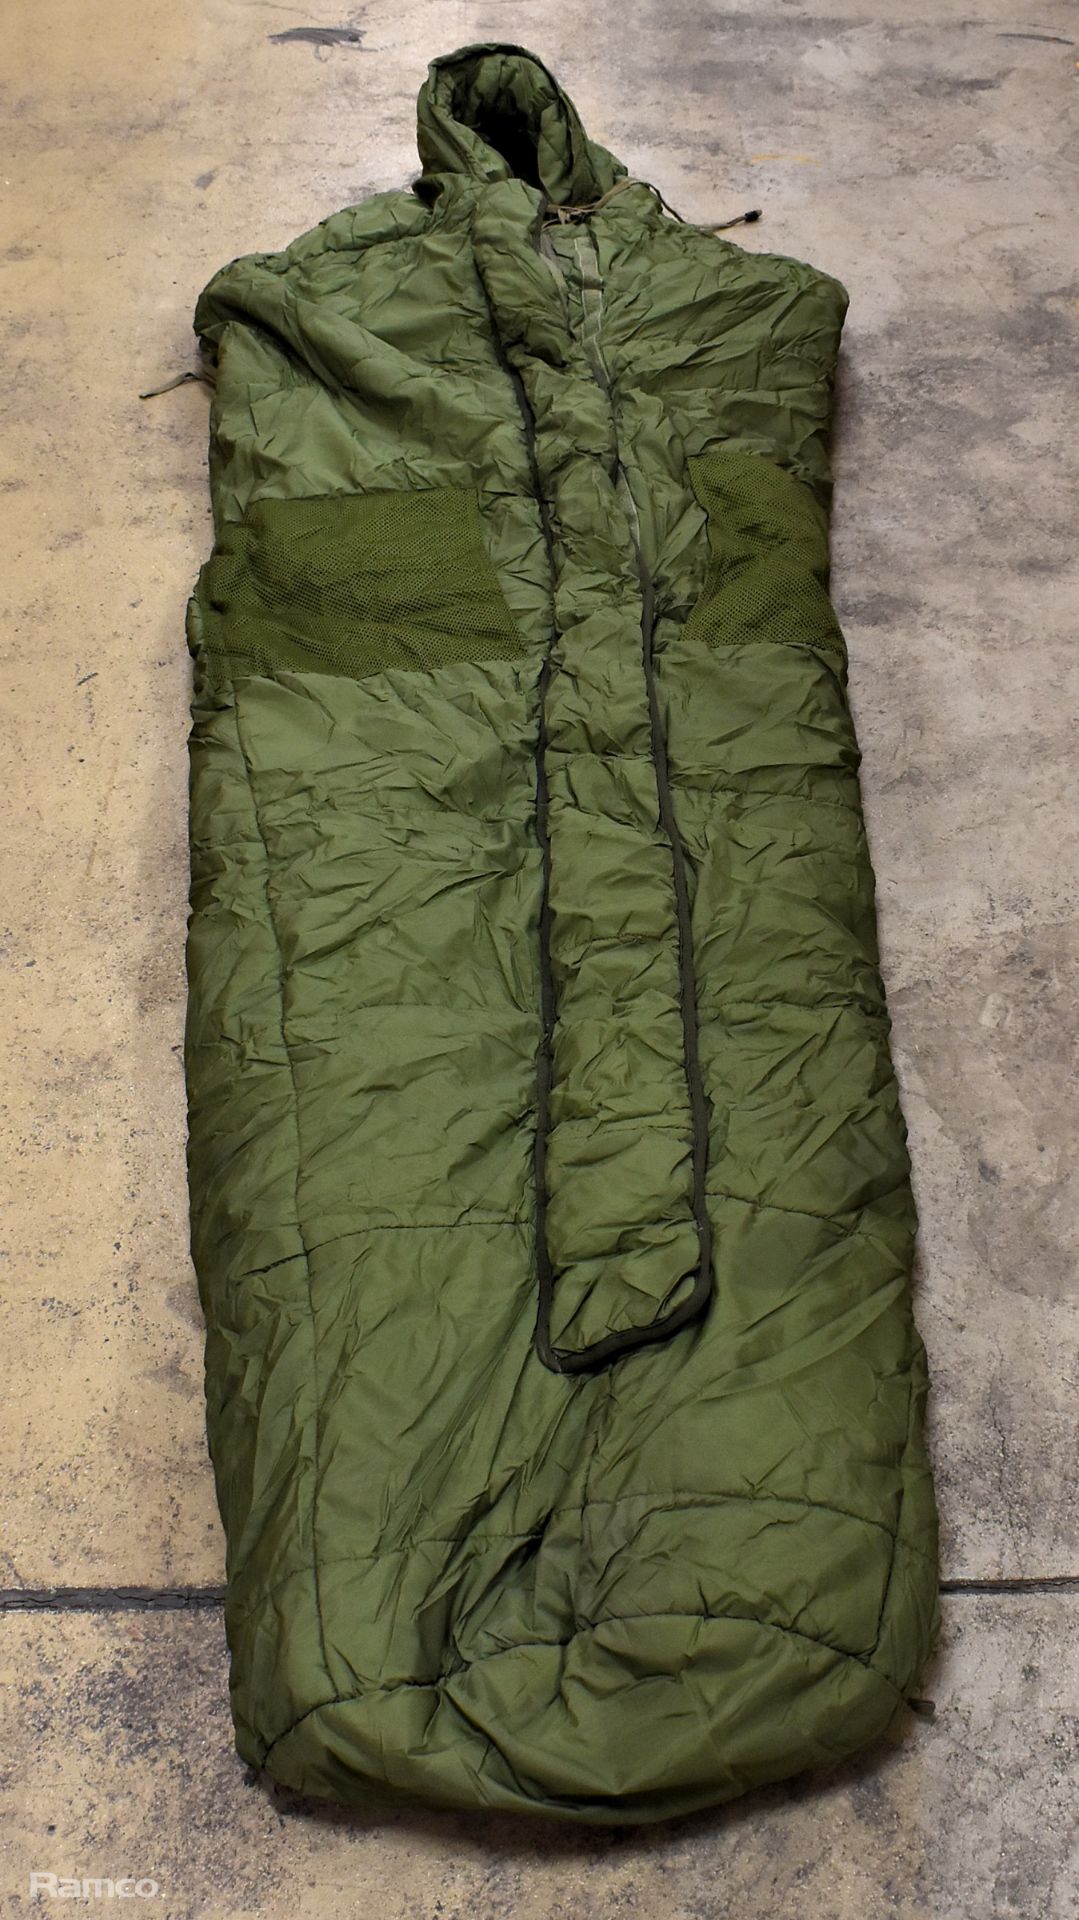 43x Sleeping bags - mixed grades and sizes - Image 2 of 8